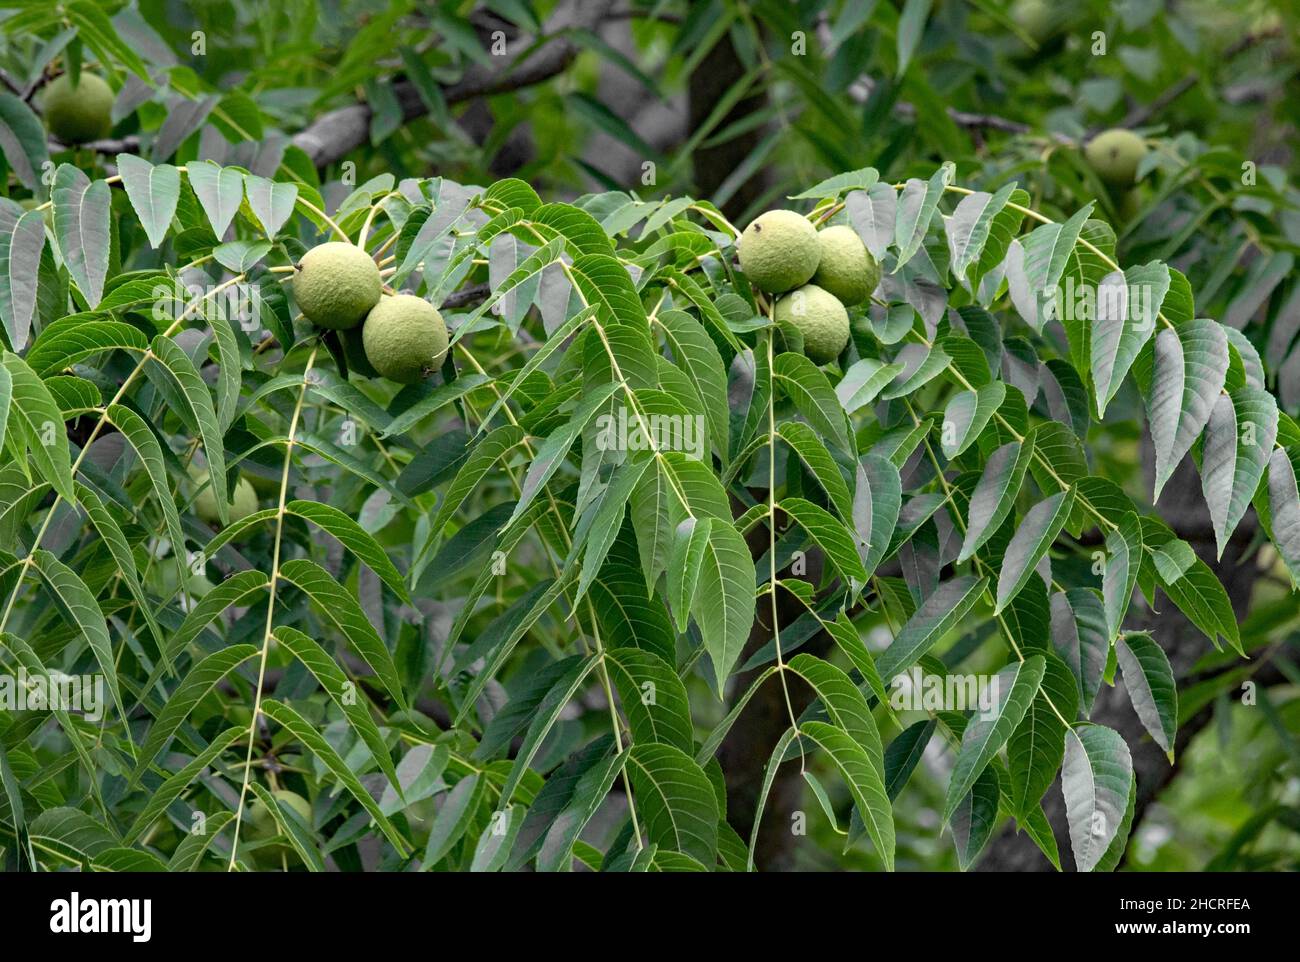 Black Walnut is a native tree of eastern North America. It produces valuable lumber and nuts. Stock Photo